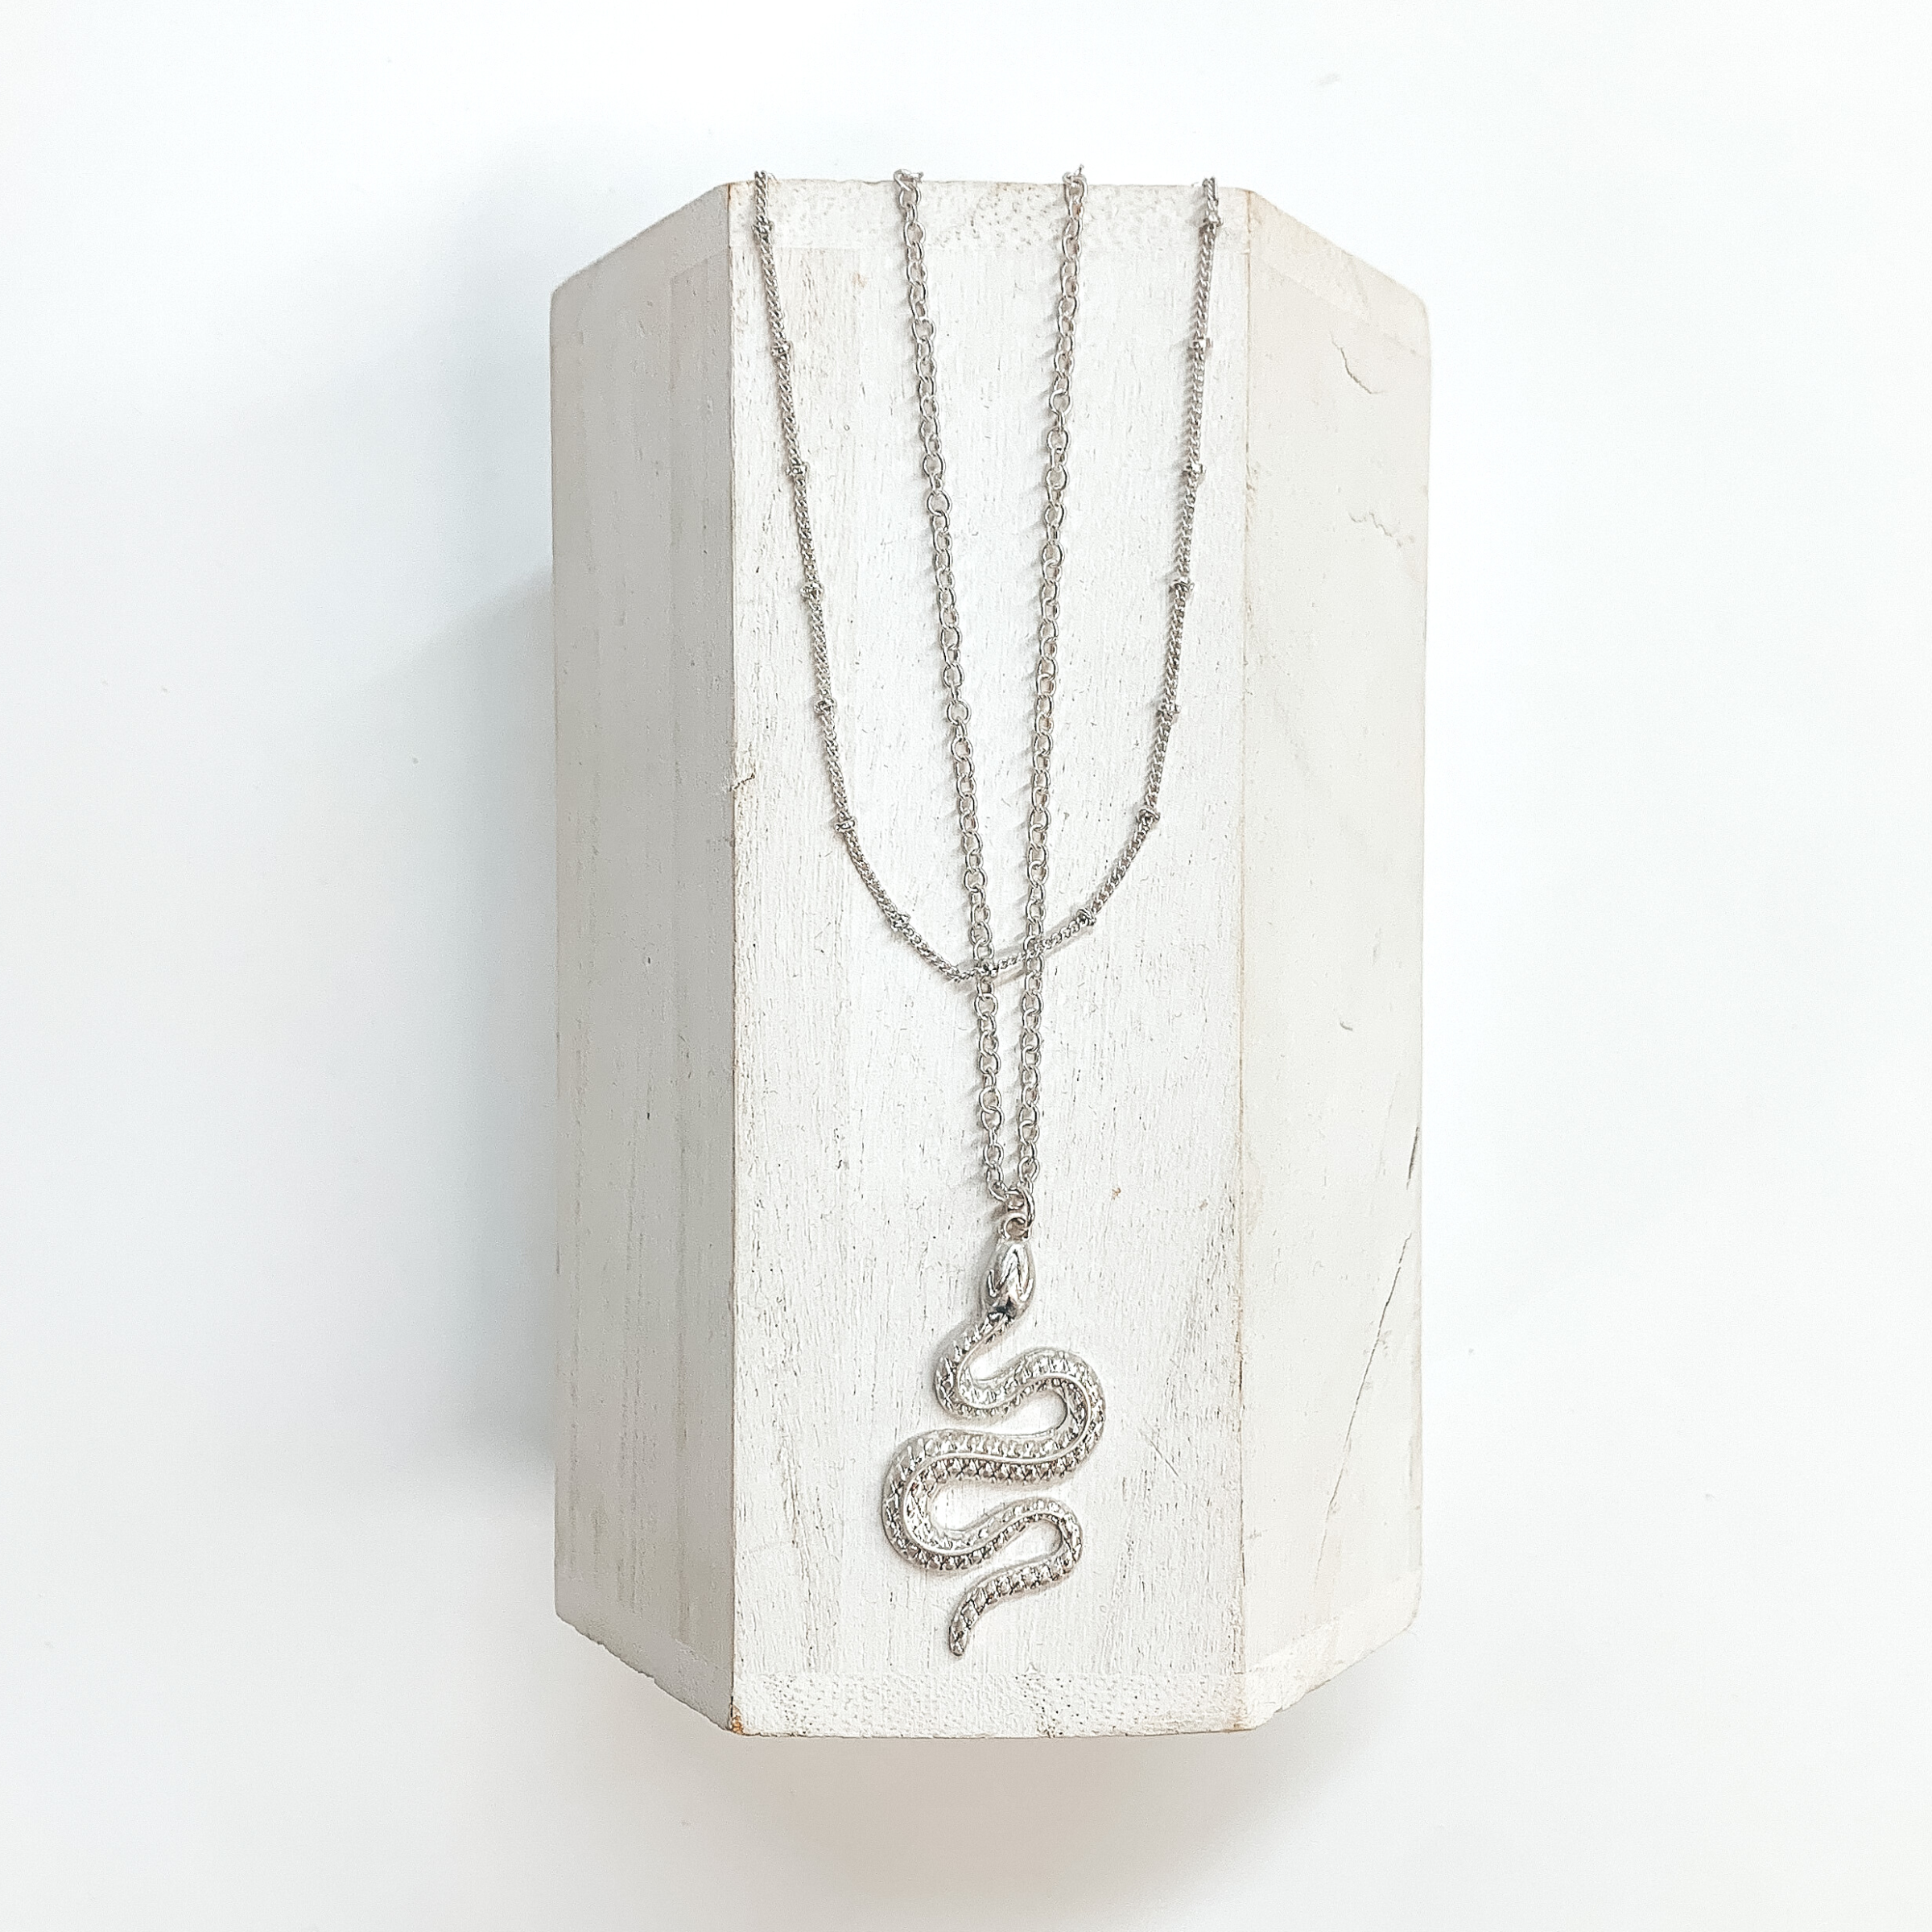 Double layered silver necklaces with a large snake pendant, the smallest  chain has spacers throughout. This necklace is taken on a white block  and a white background.